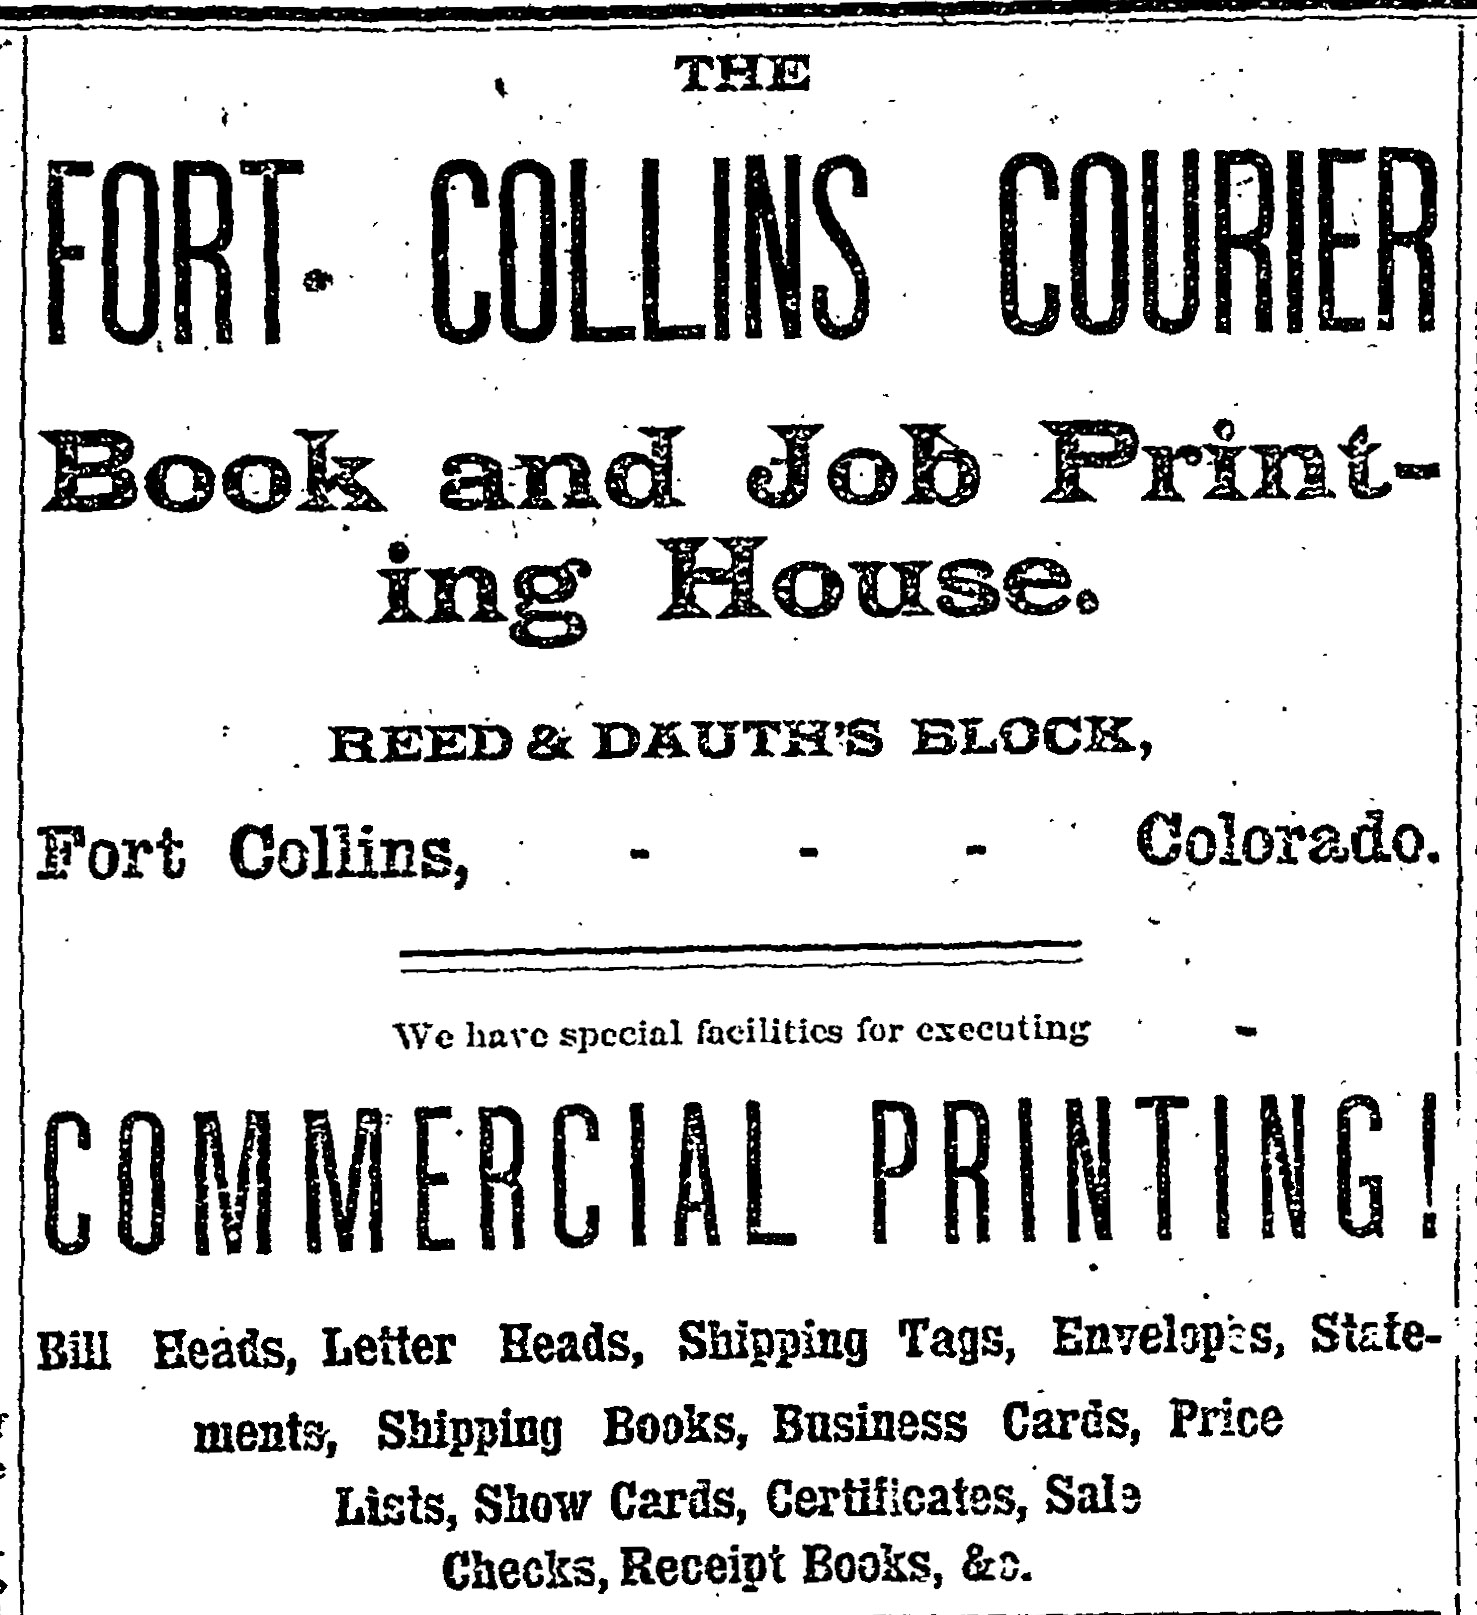 Dauth Family Archive - 1881-12-22 - Fort Collins Courier - Fort Collins Courier Reed-Dauth Block Tenet